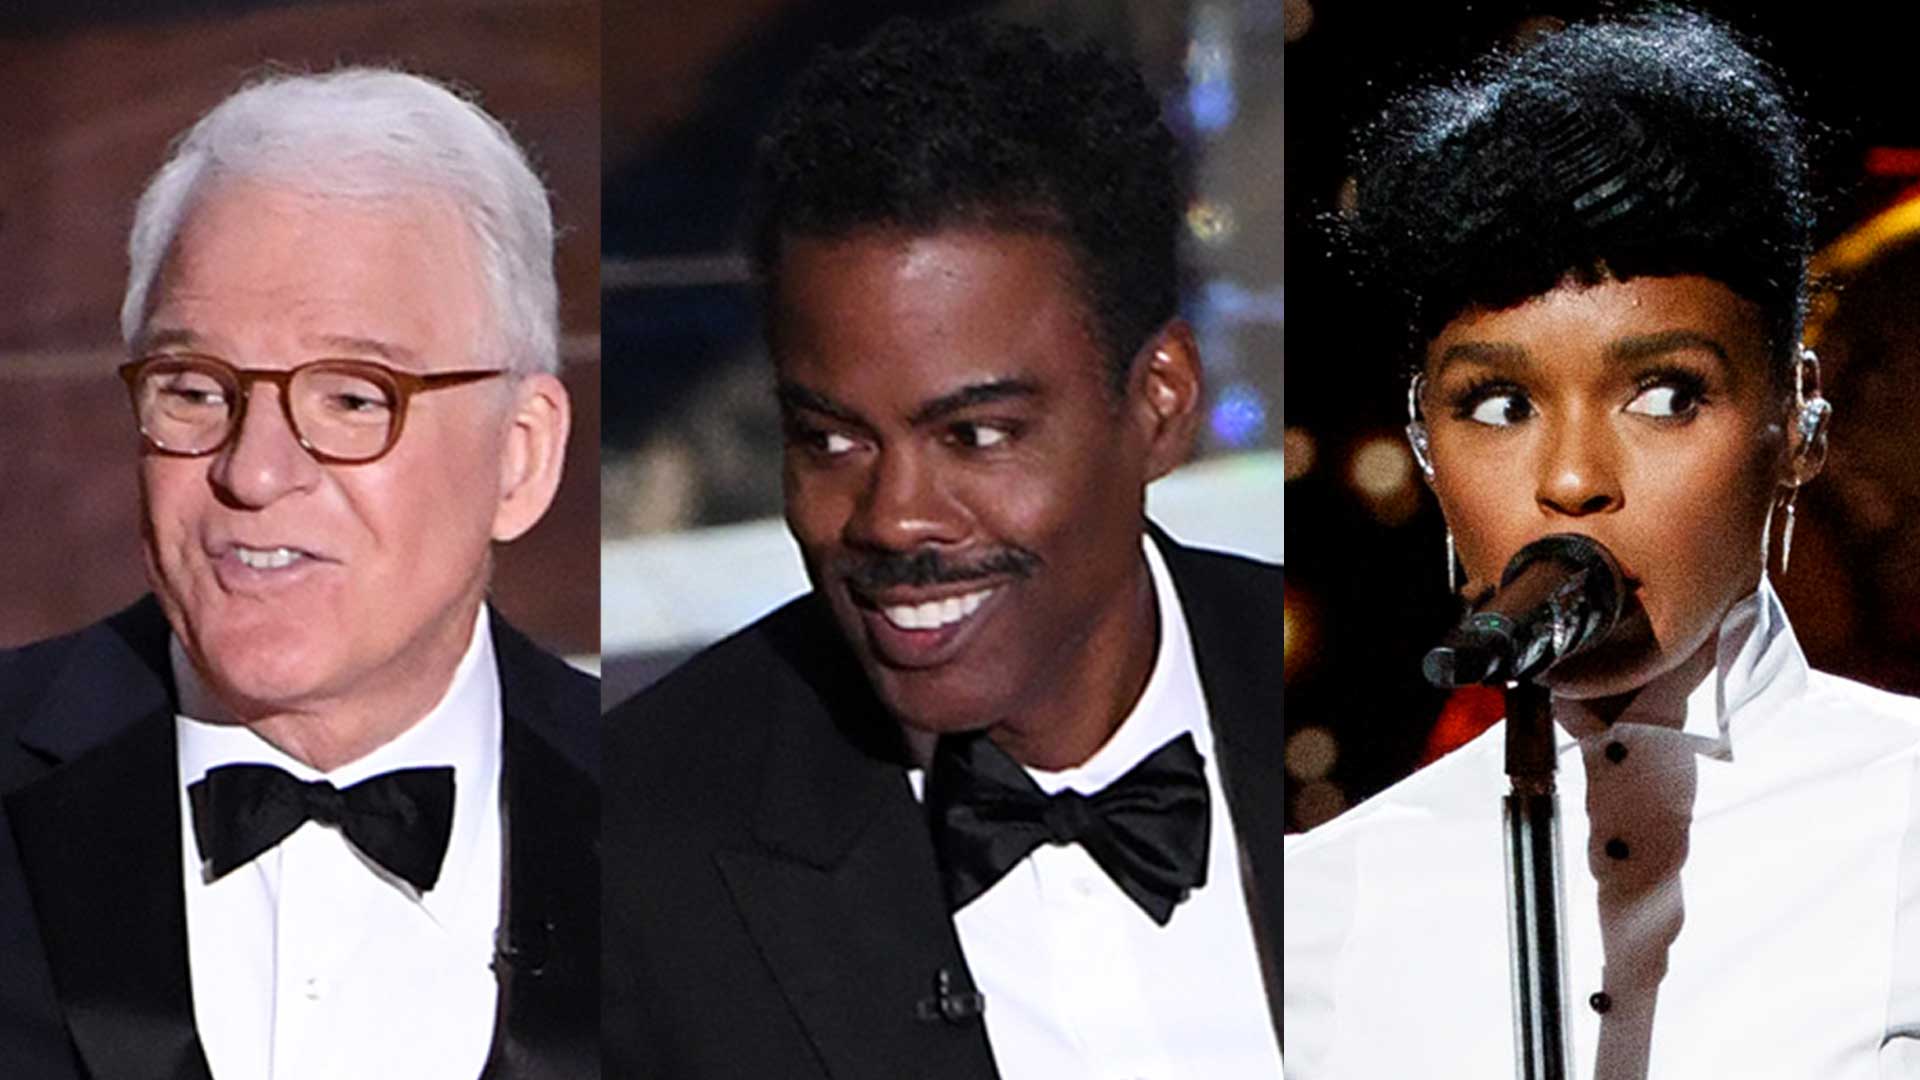 Who Is Hosting the Oscars 2021? Here's What We Know